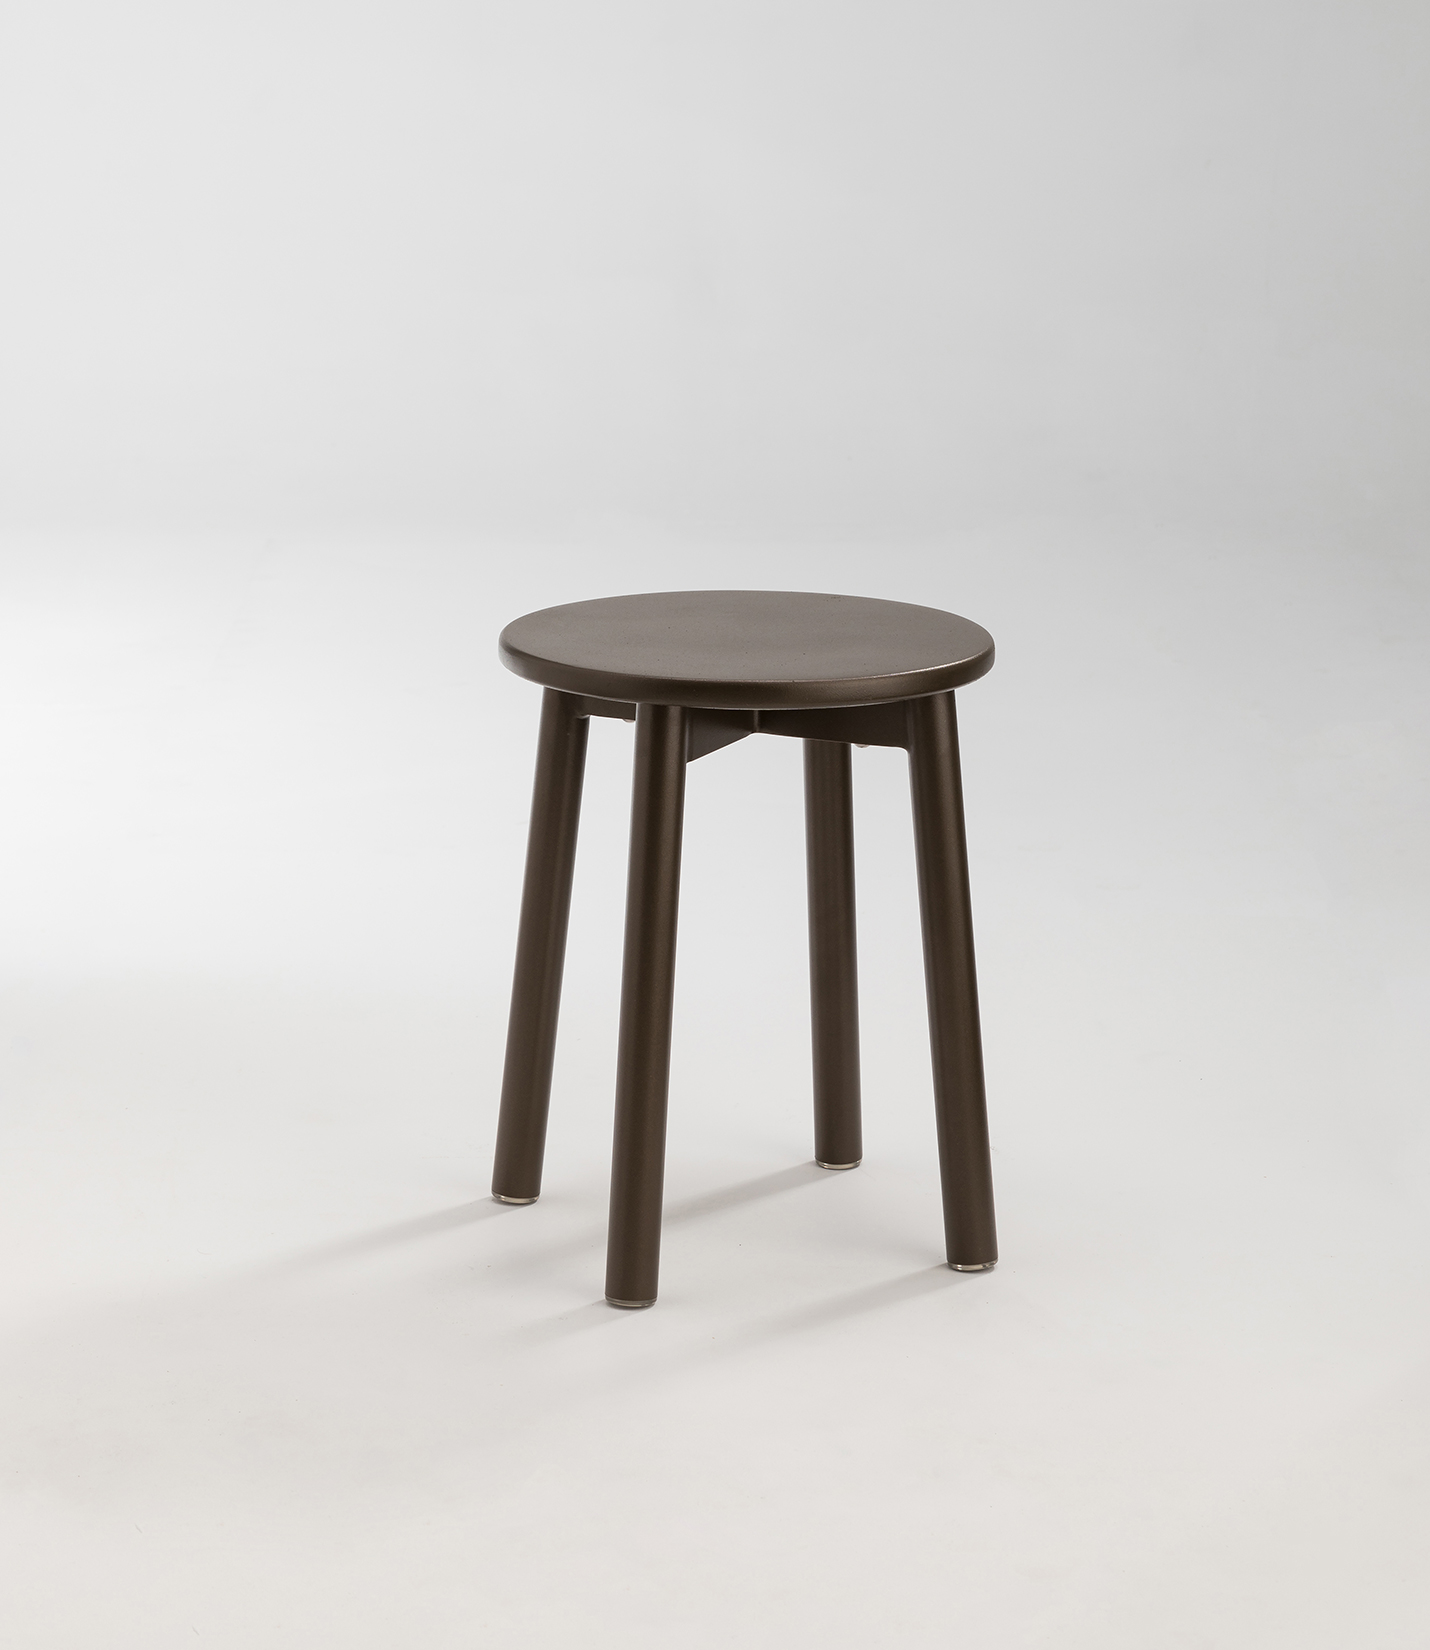 Fable Outdoor Low Stool